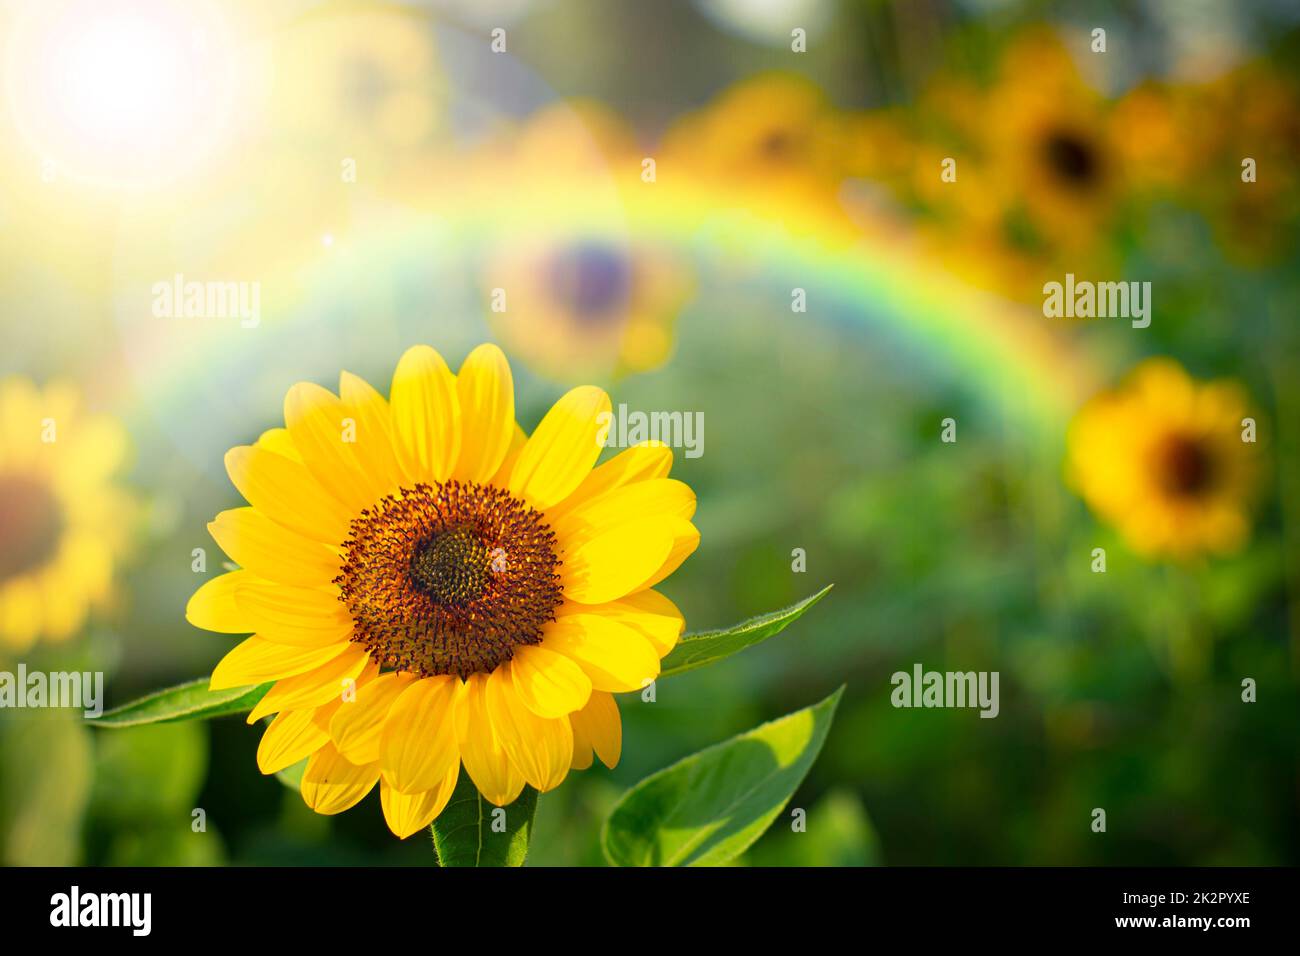 soft focus  sunflower with rainbow , selective focus on blurred background. Stock Photo